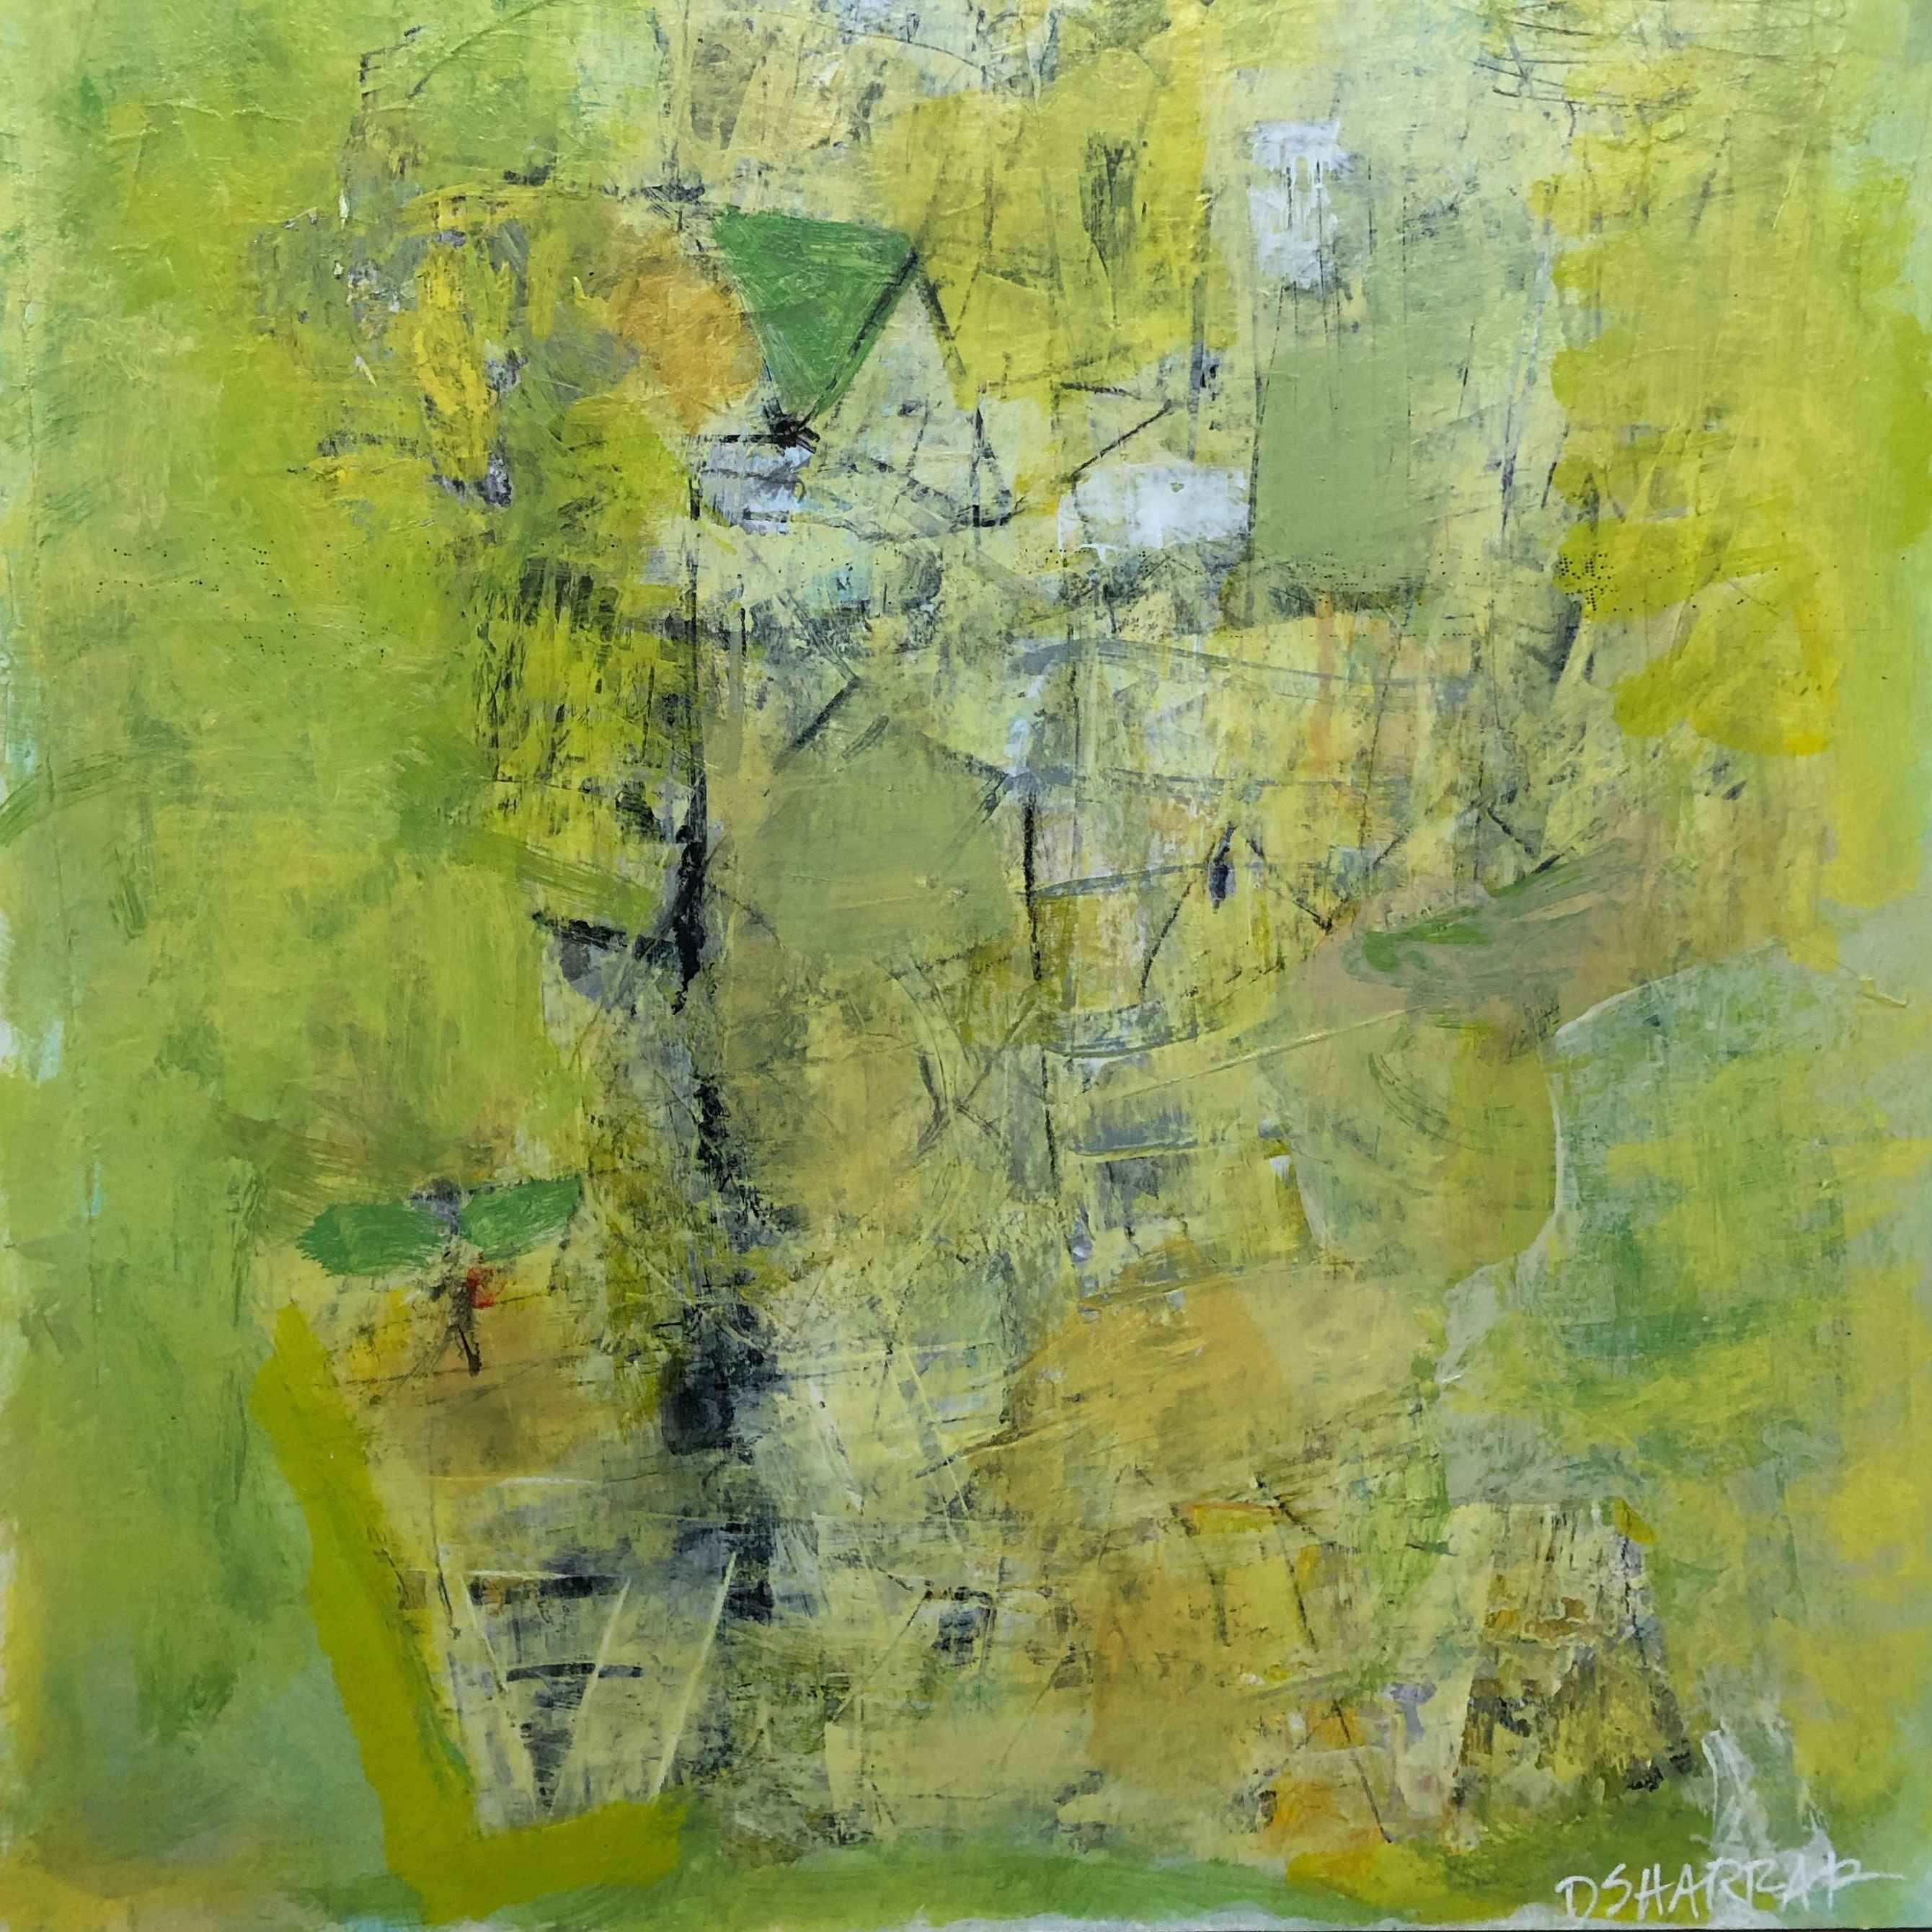 Abstract painting by Dorothy Sharrar in yellows and greens